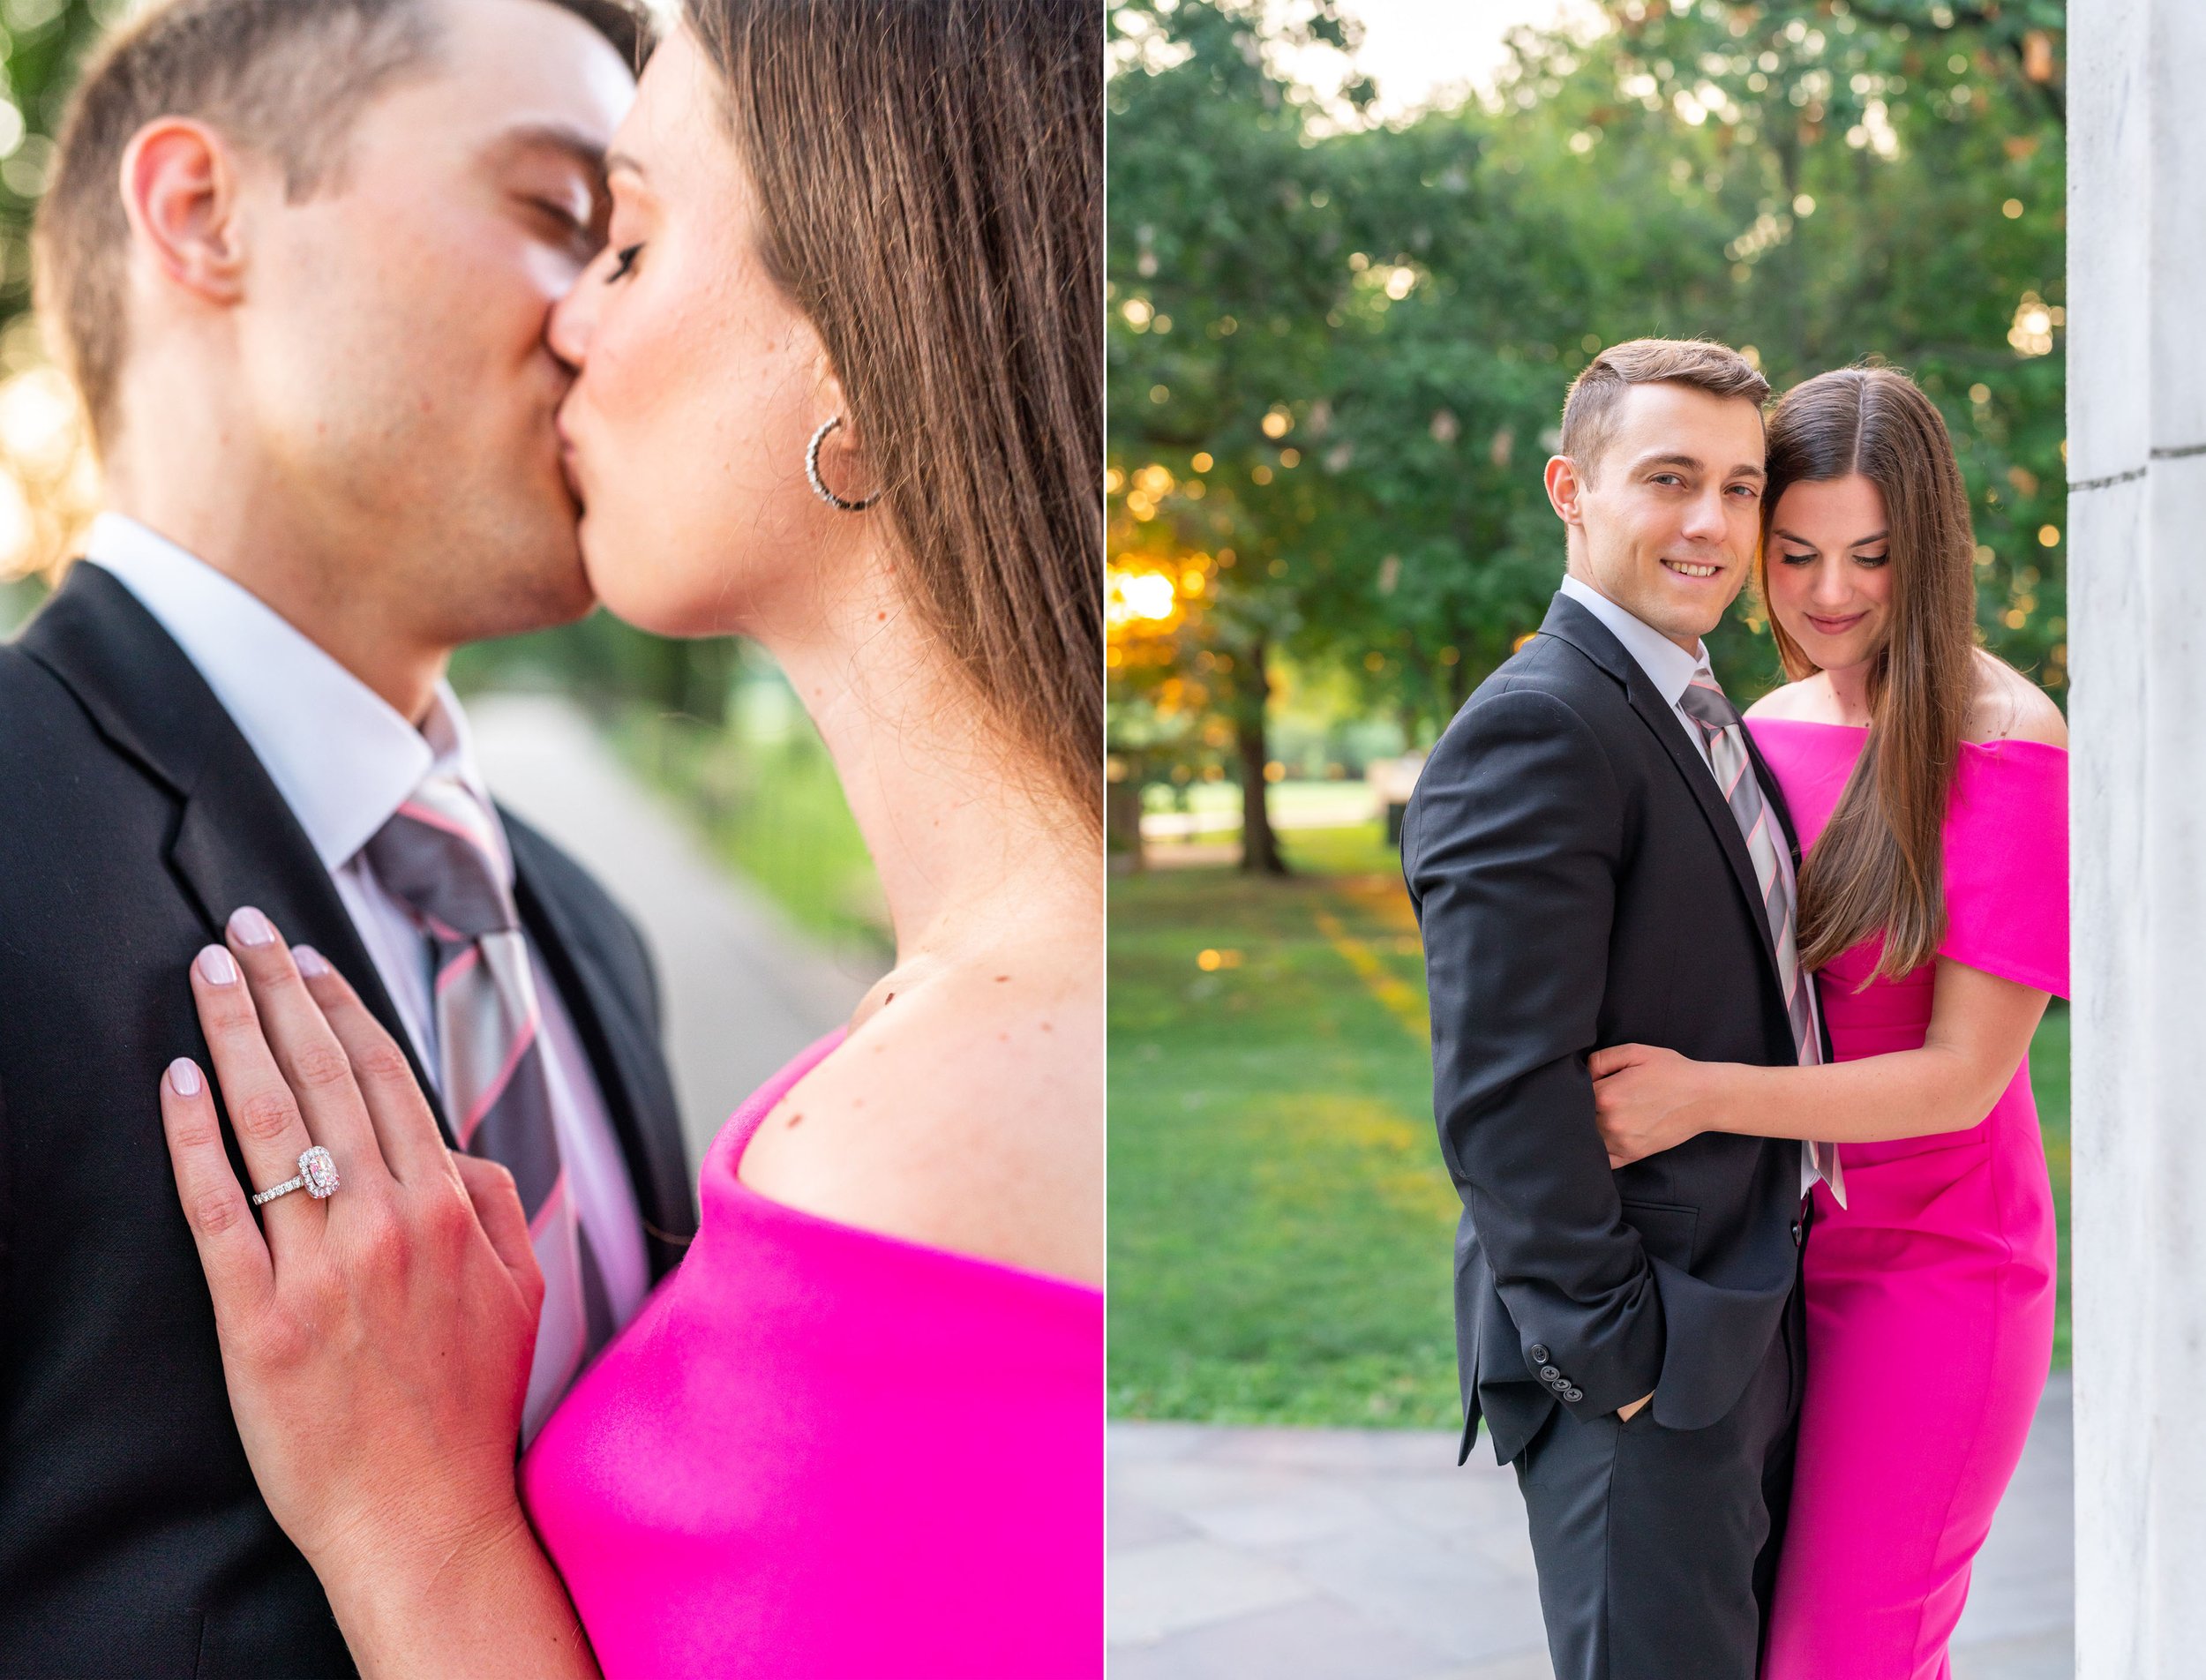 Golden hour and sunrise lighting at the War Memorial in DC engagement photos